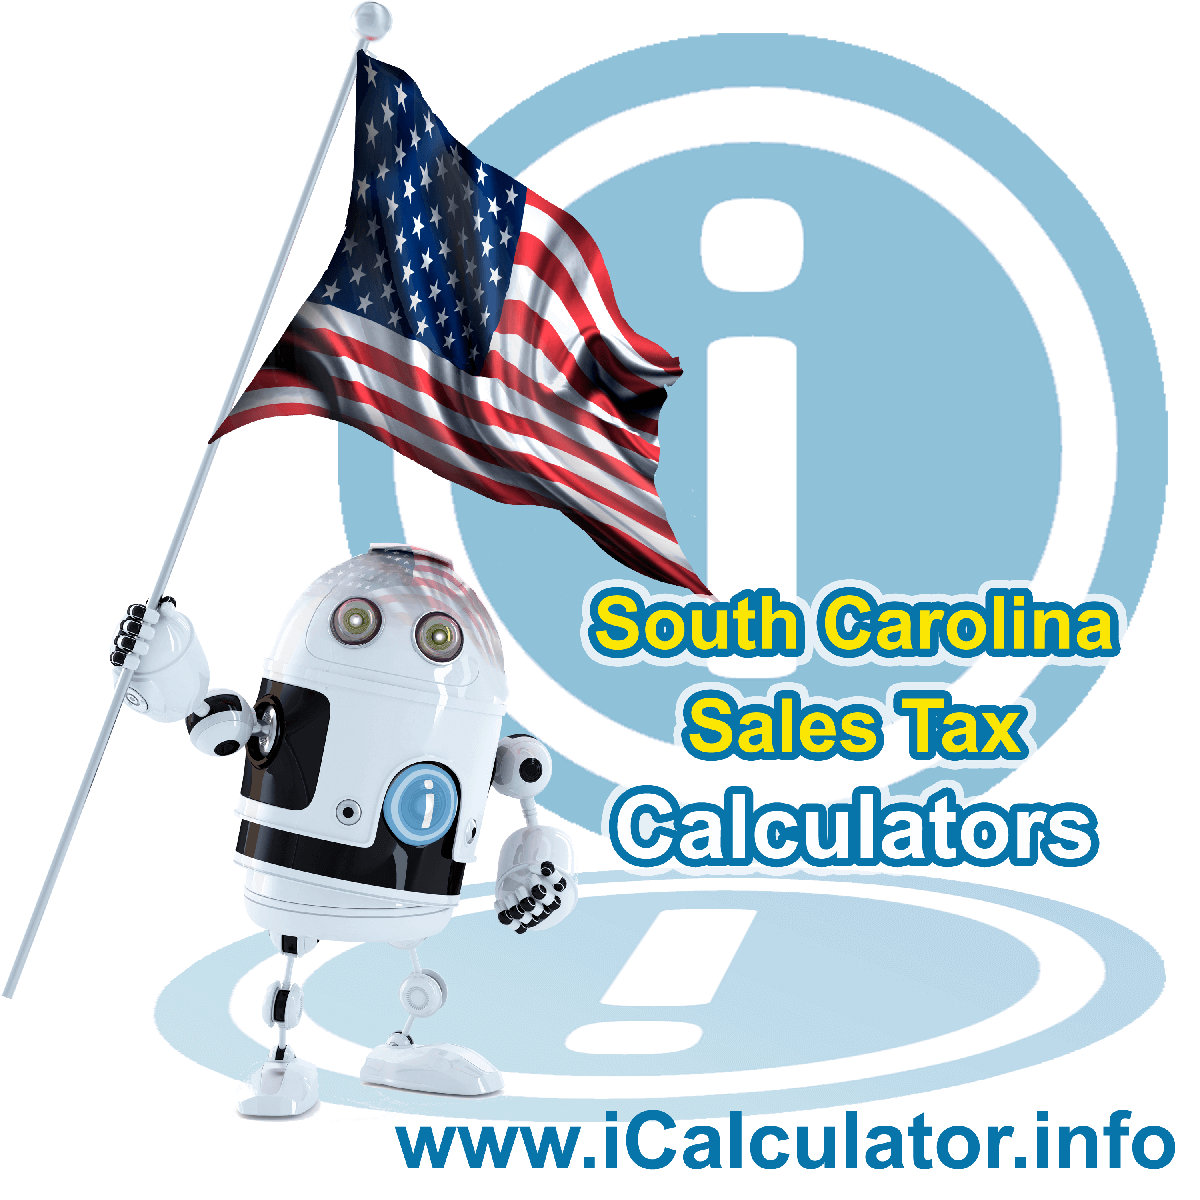 Anderson Sales Rates: This image illustrates a calculator robot calculating Anderson sales tax manually using the Anderson Sales Tax Formula. You can use this information to calculate Anderson Sales Tax manually or use the Anderson Sales Tax Calculator to calculate sales tax online.